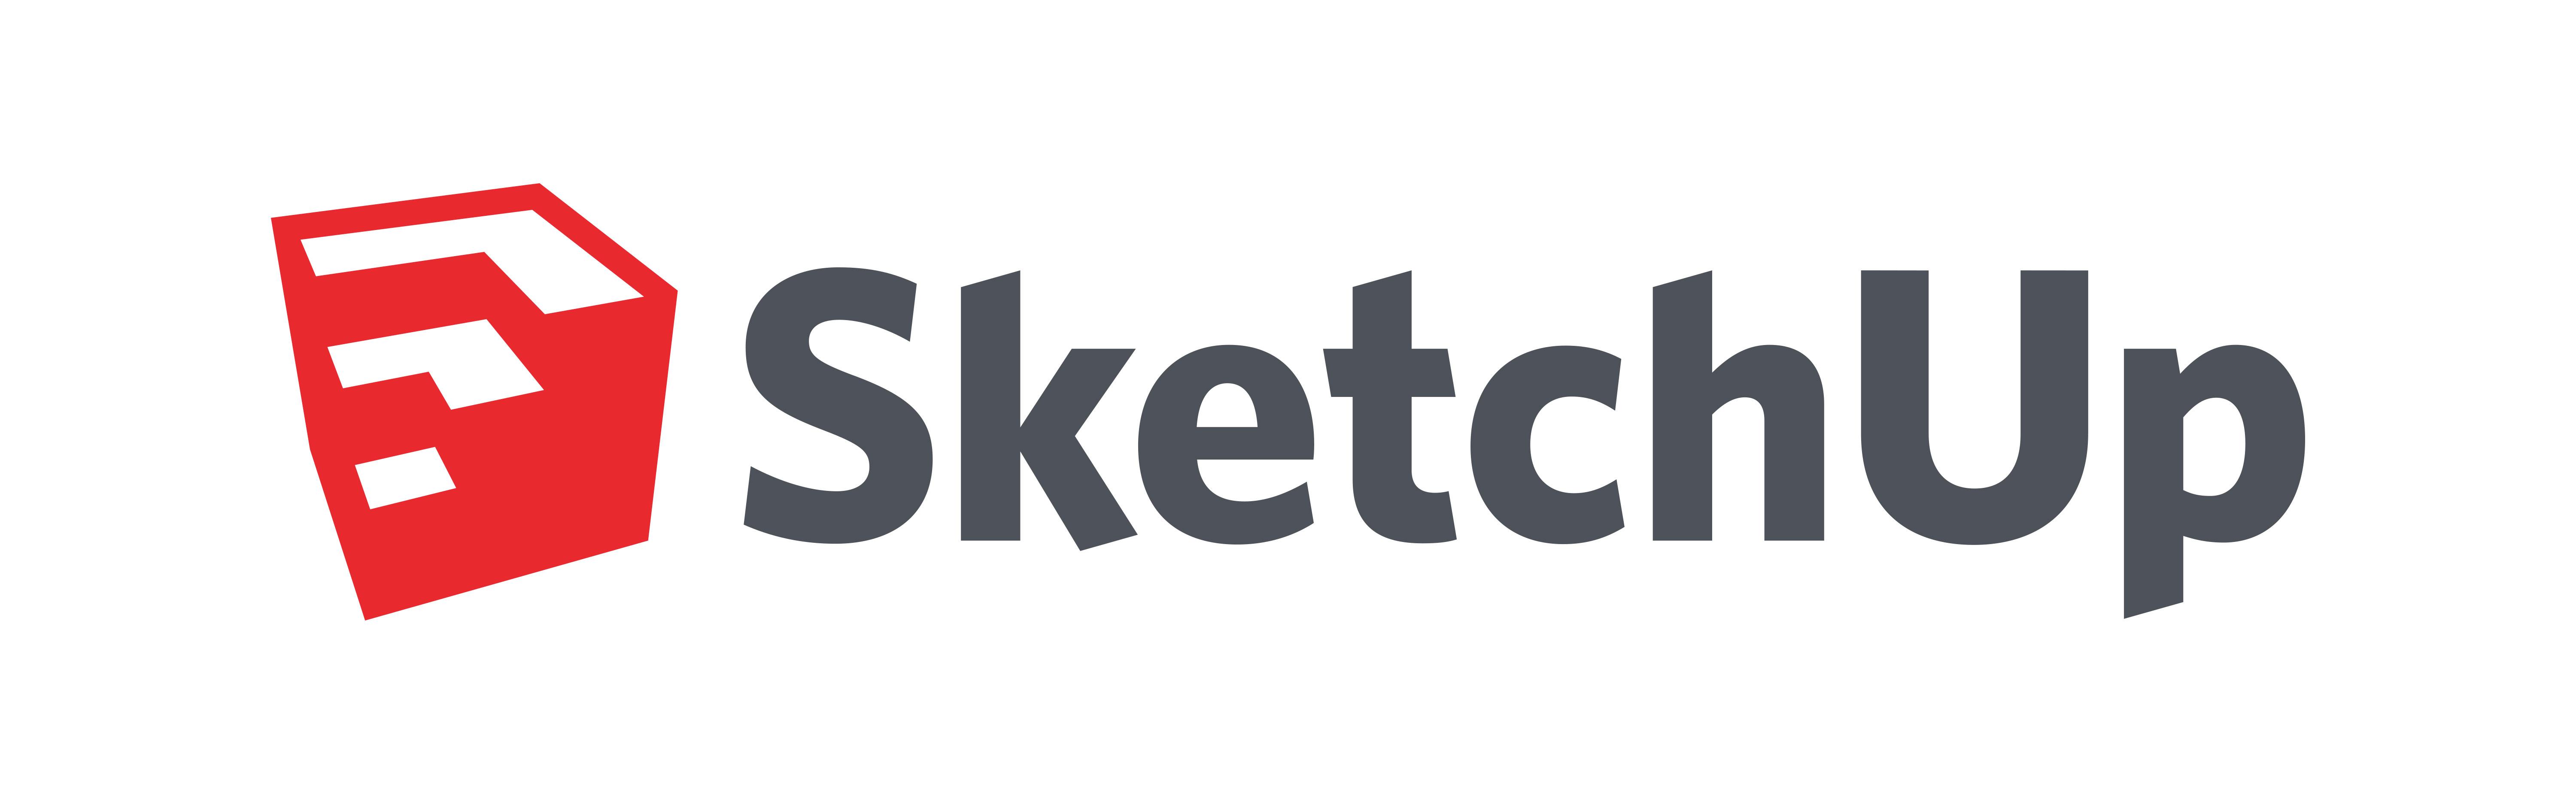 Learn to Use SketchUp 3D Modeling Software in 17 Easy Steps 3DPrint